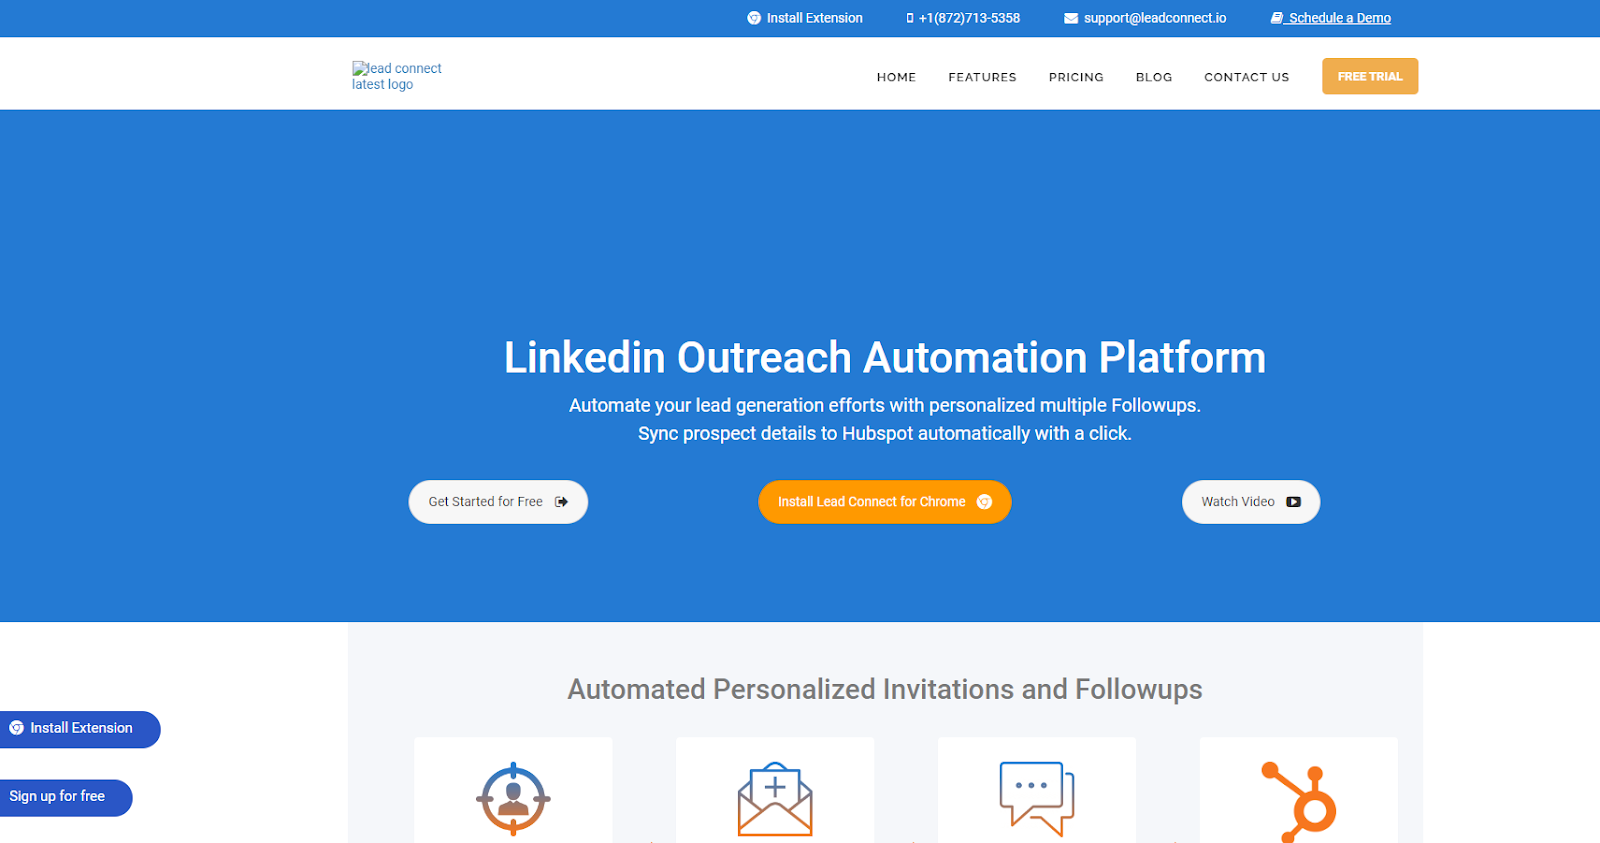 Best LinkedIn Lead Generation Tools:- Lead Connect